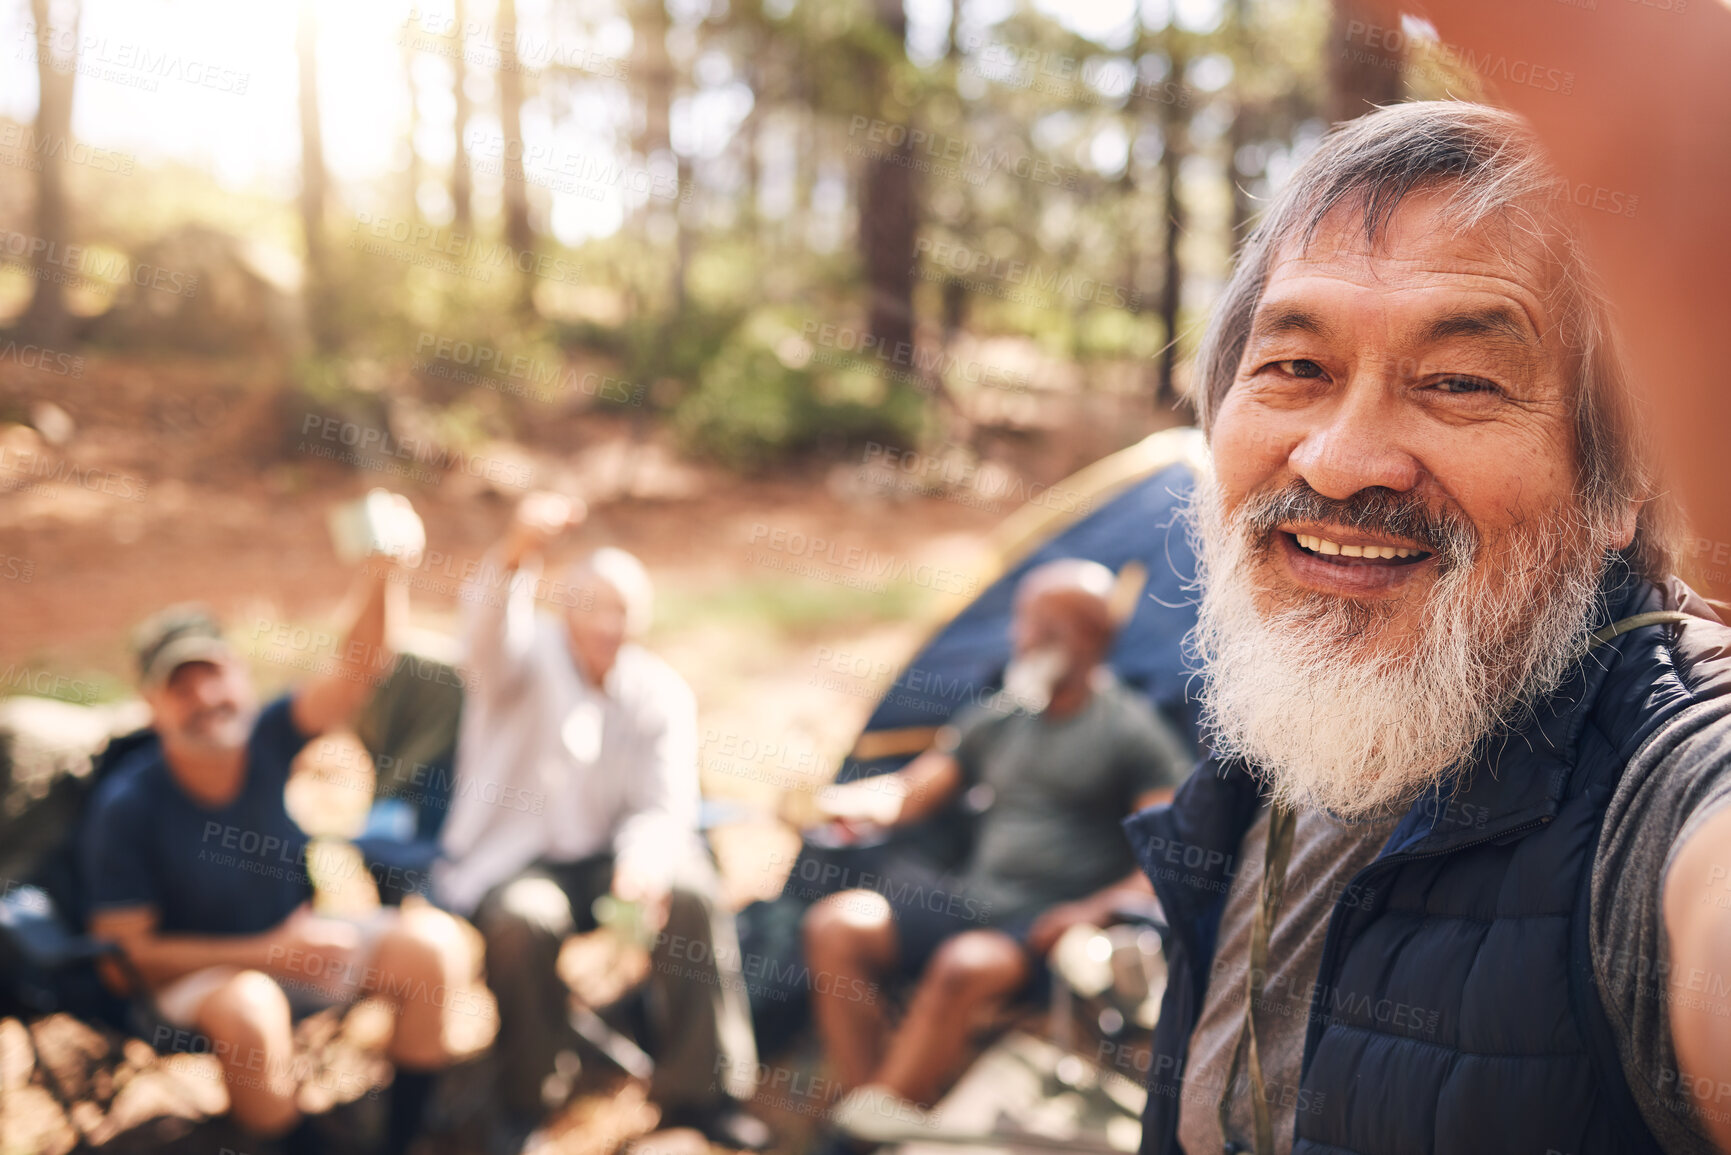 Buy stock photo Camping, selfie and senior man with friends in nature taking pictures for happy memory. Asian, face portrait or group of elderly men take photo for social media after trekking hike outdoors at camp.